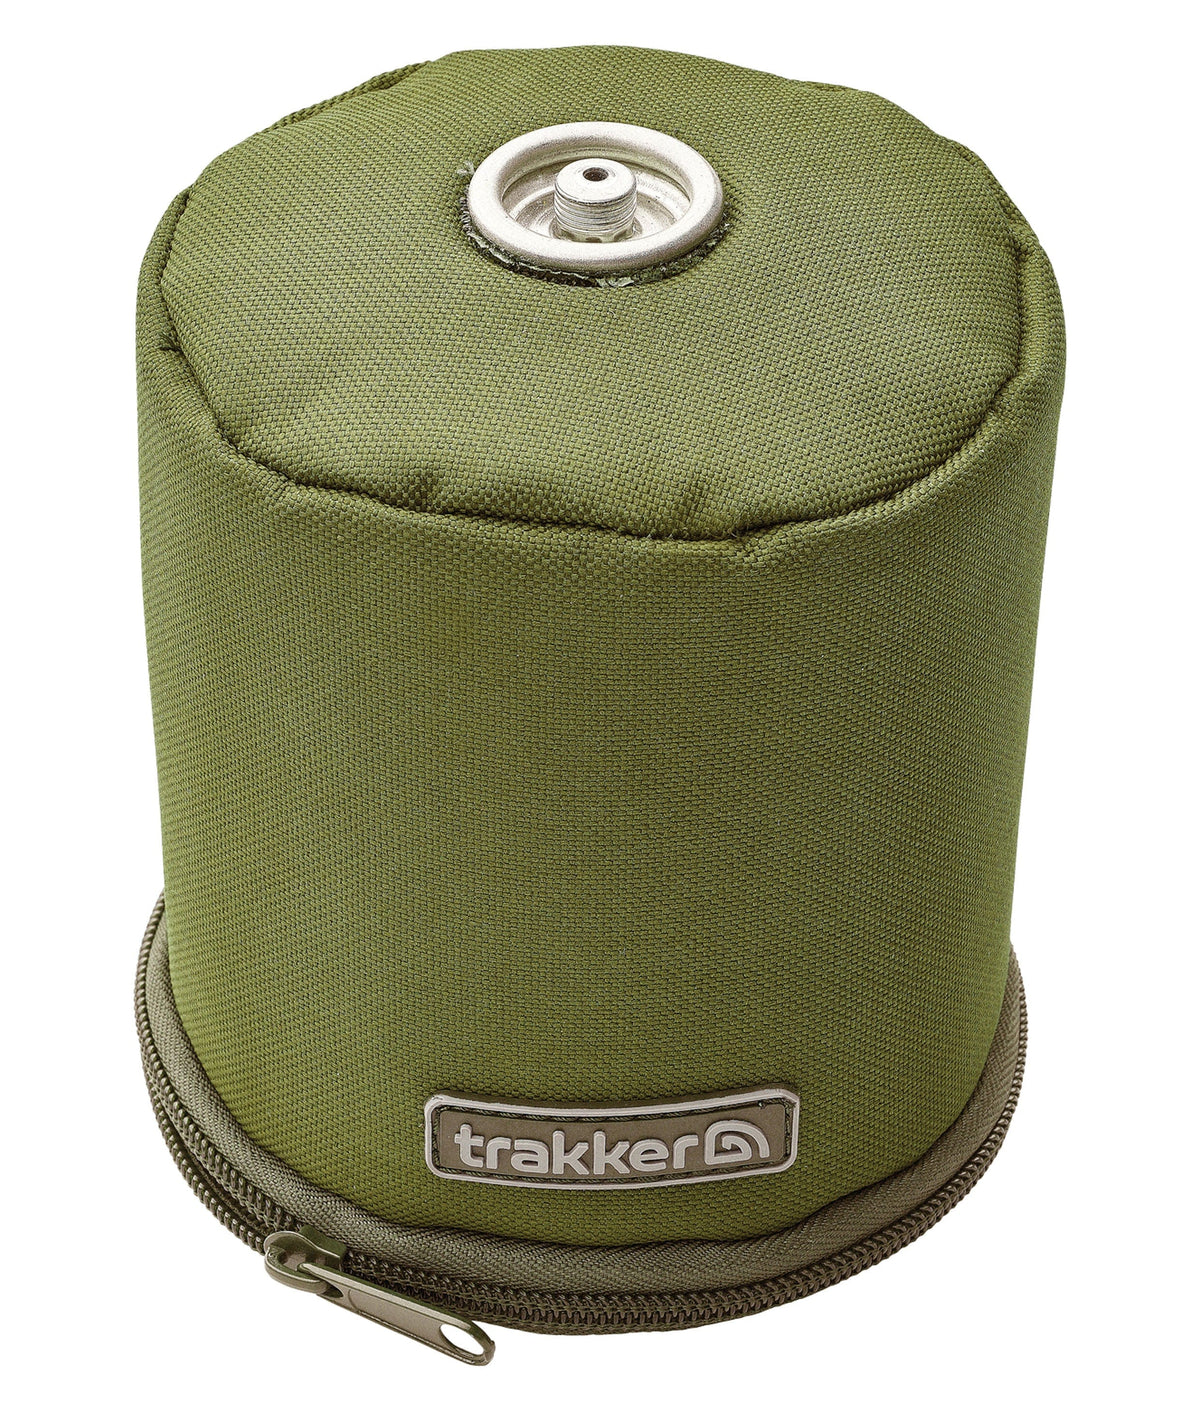 Trakker NXG Insulated Gas Canister Cover.